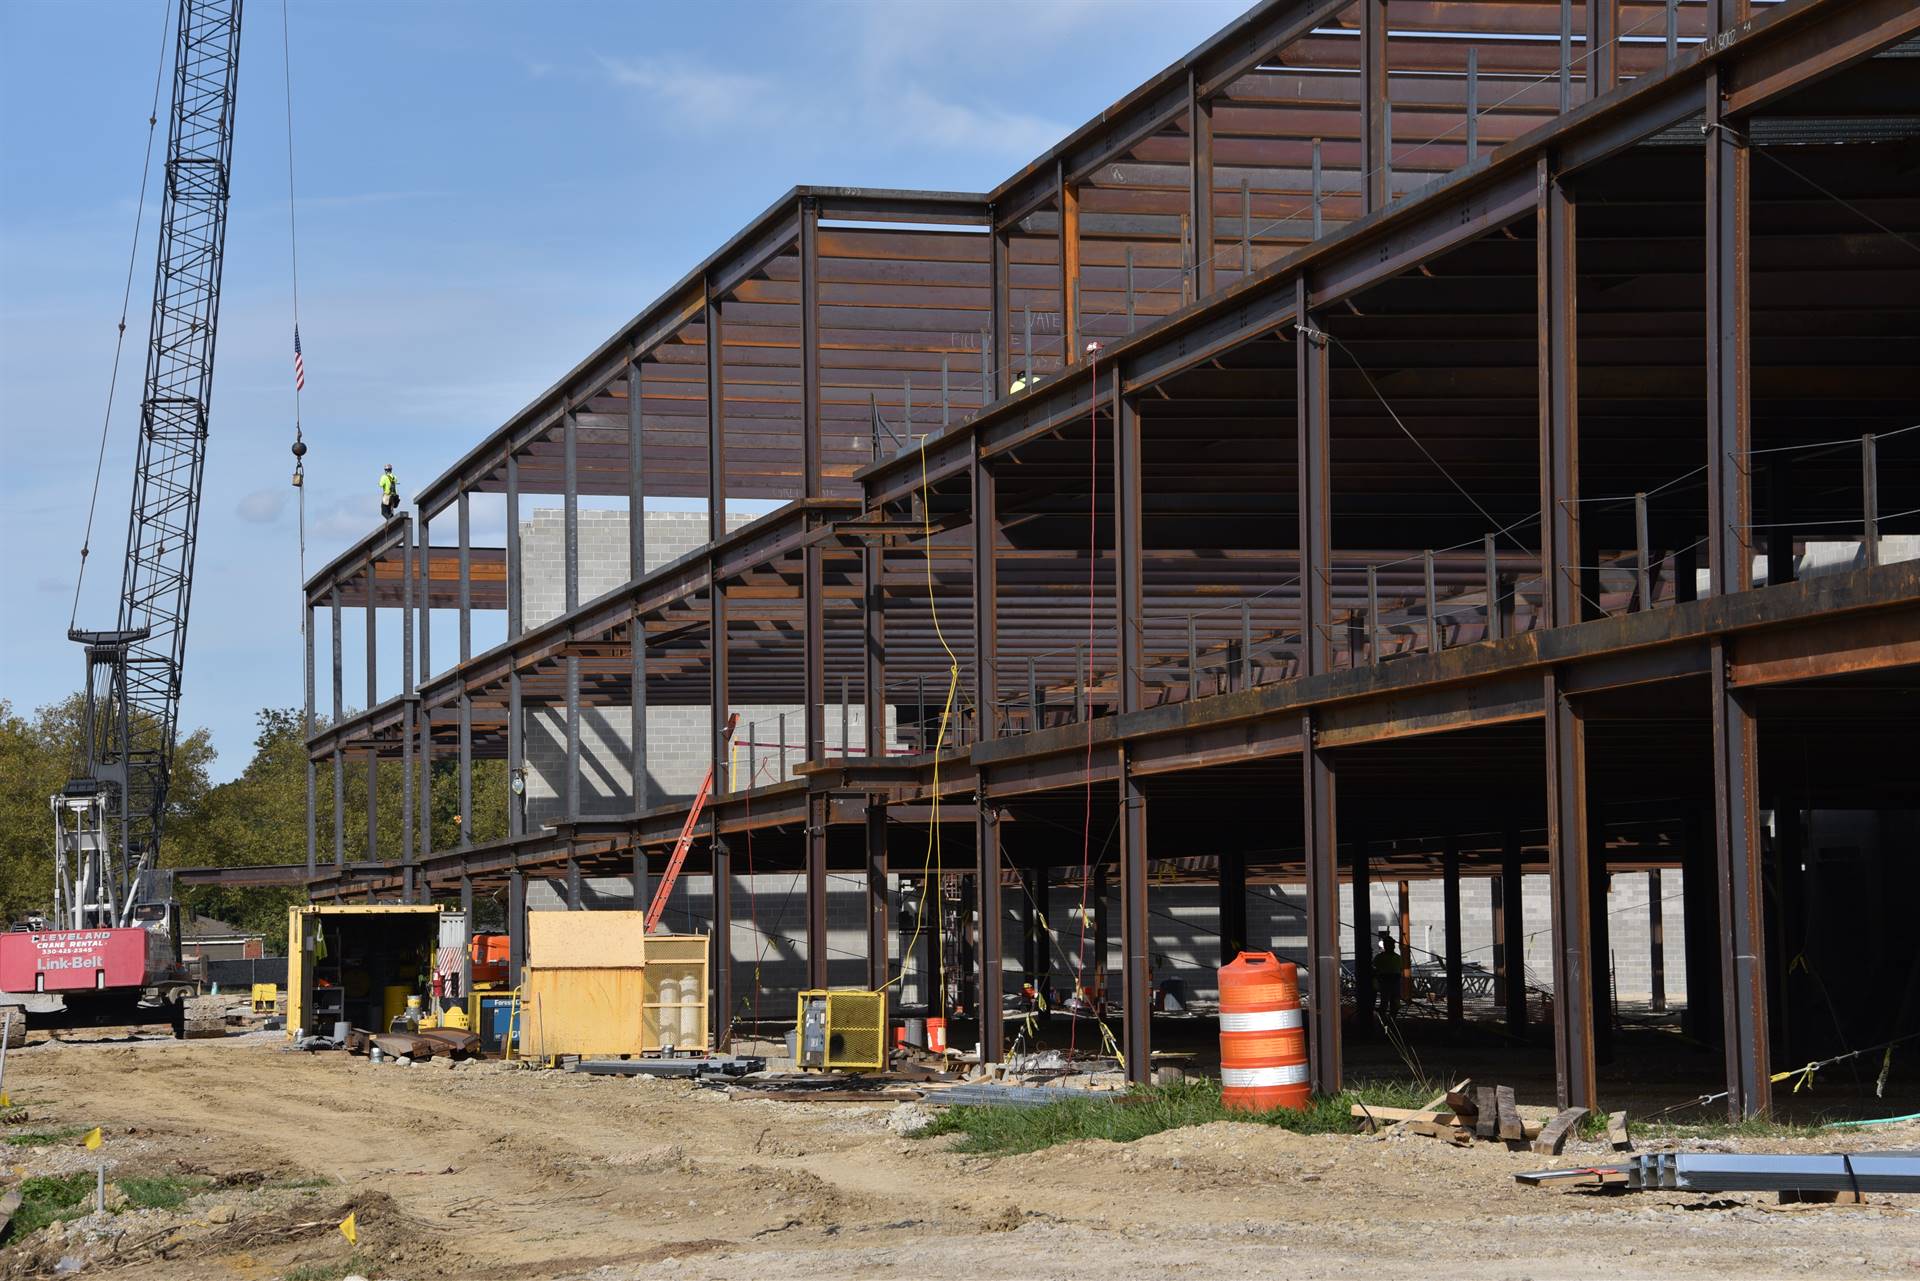 Structural steel installation on the new high school academic wing